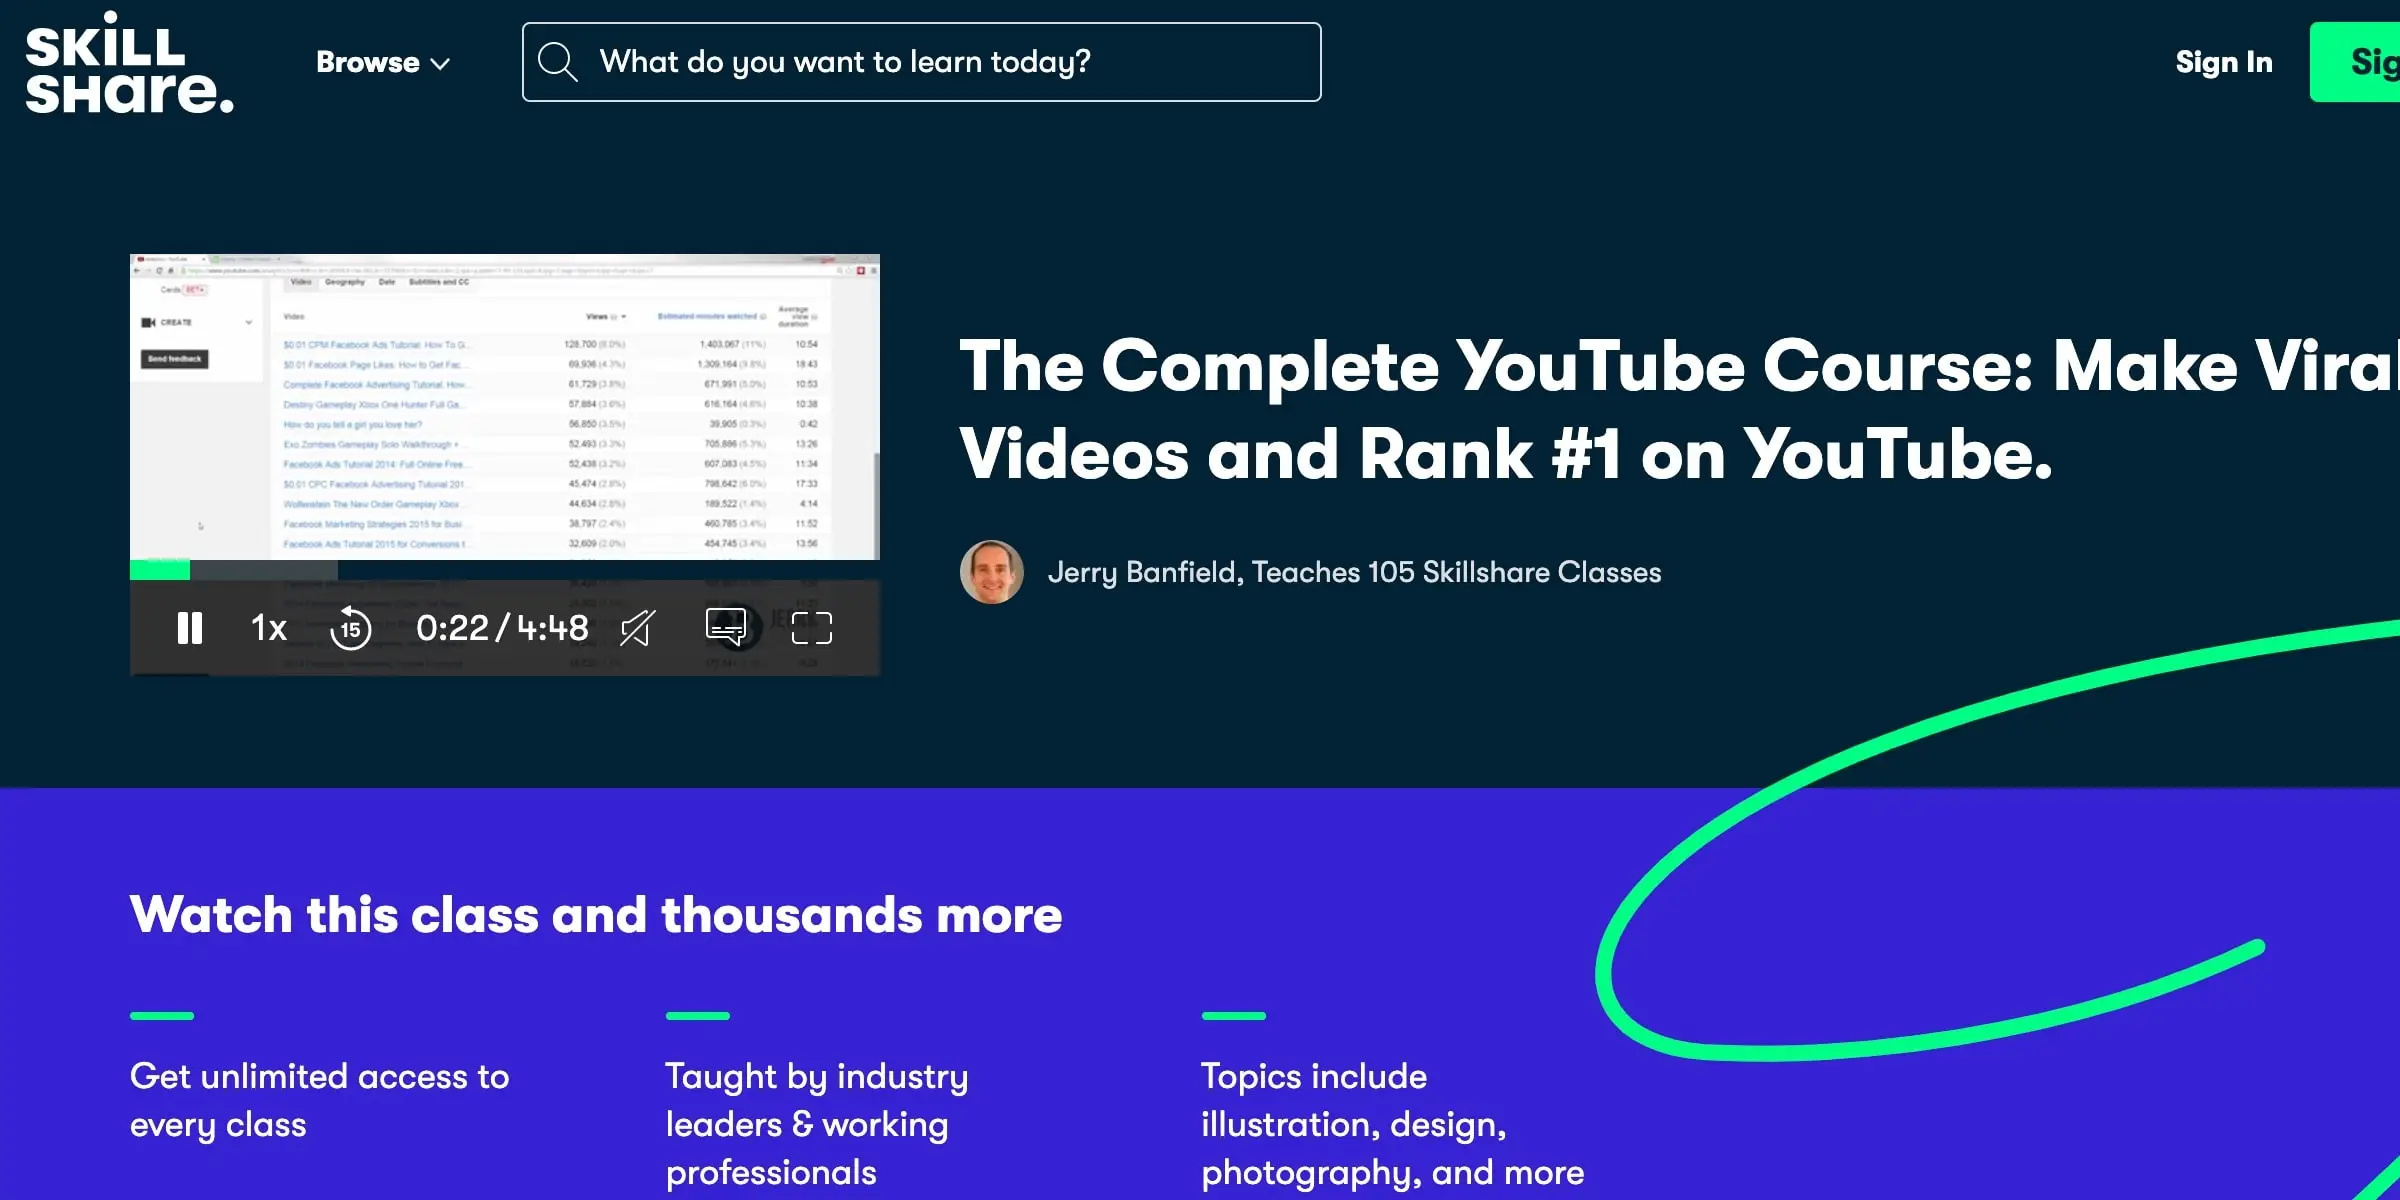 The Complete YouTube Course